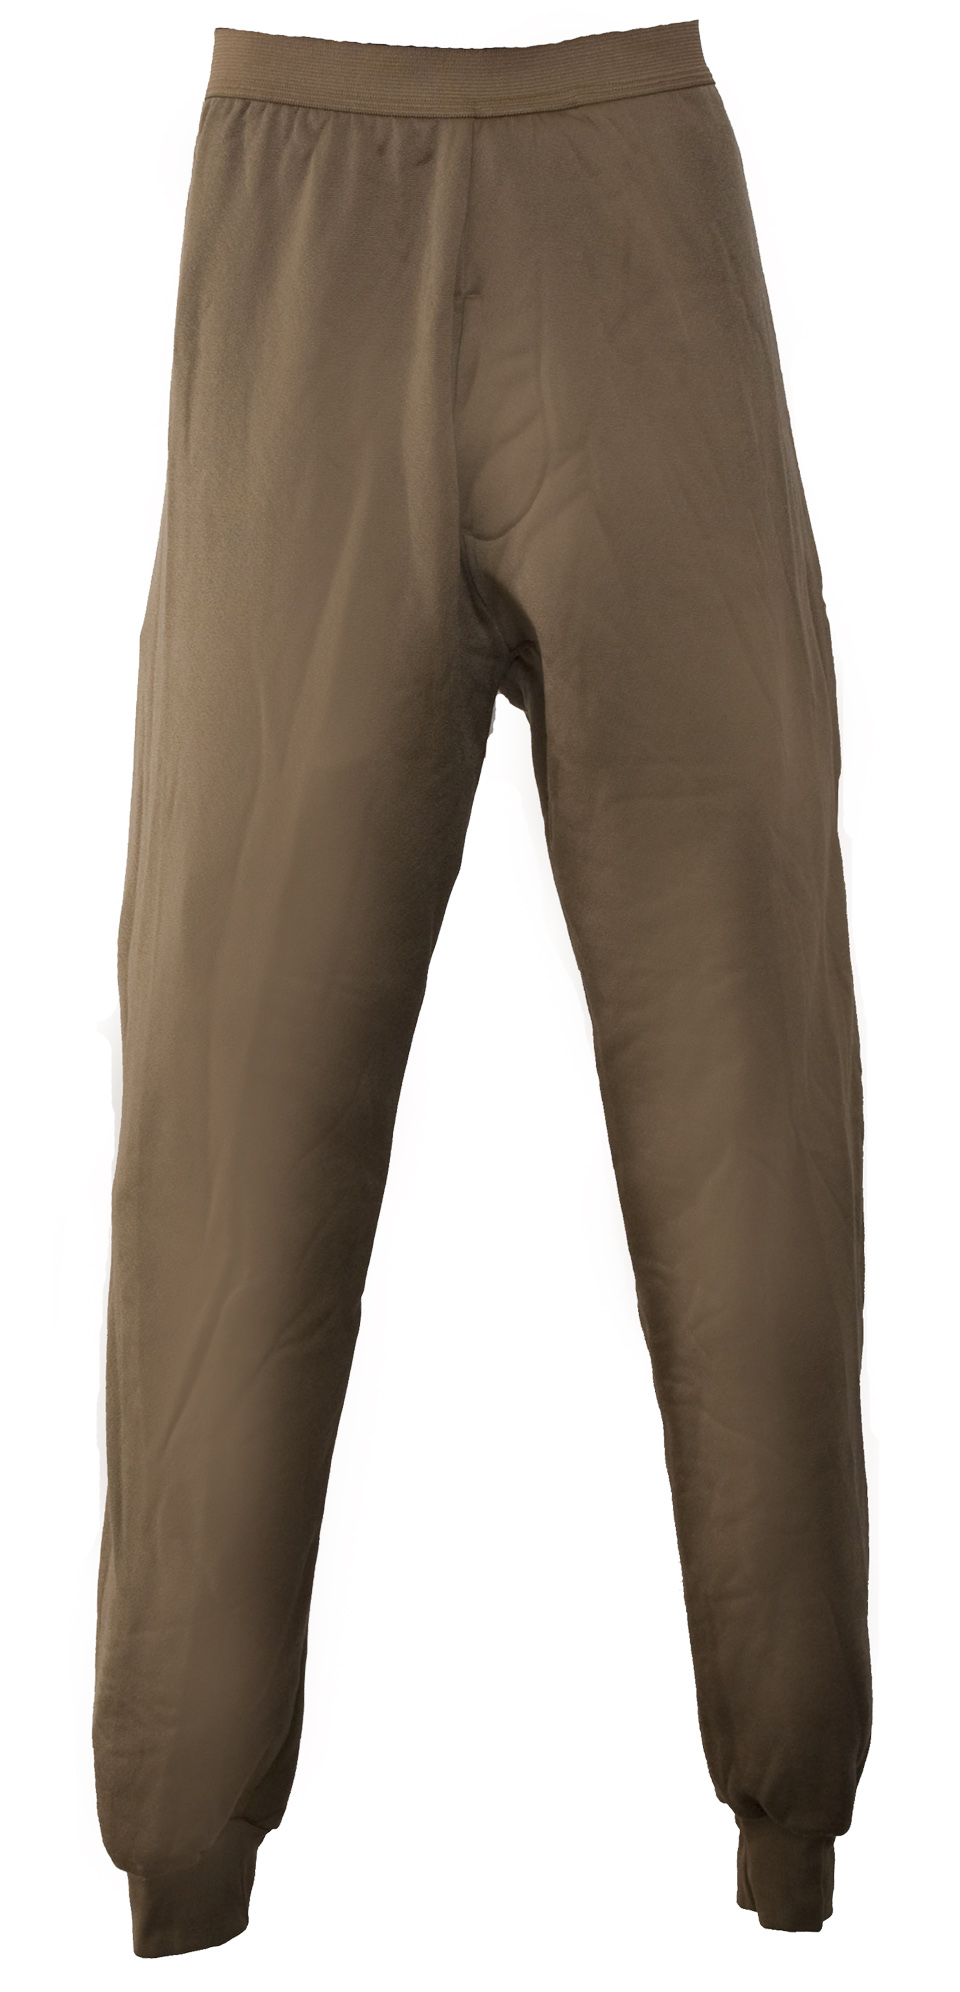 Polypropylene Pant Military Issue